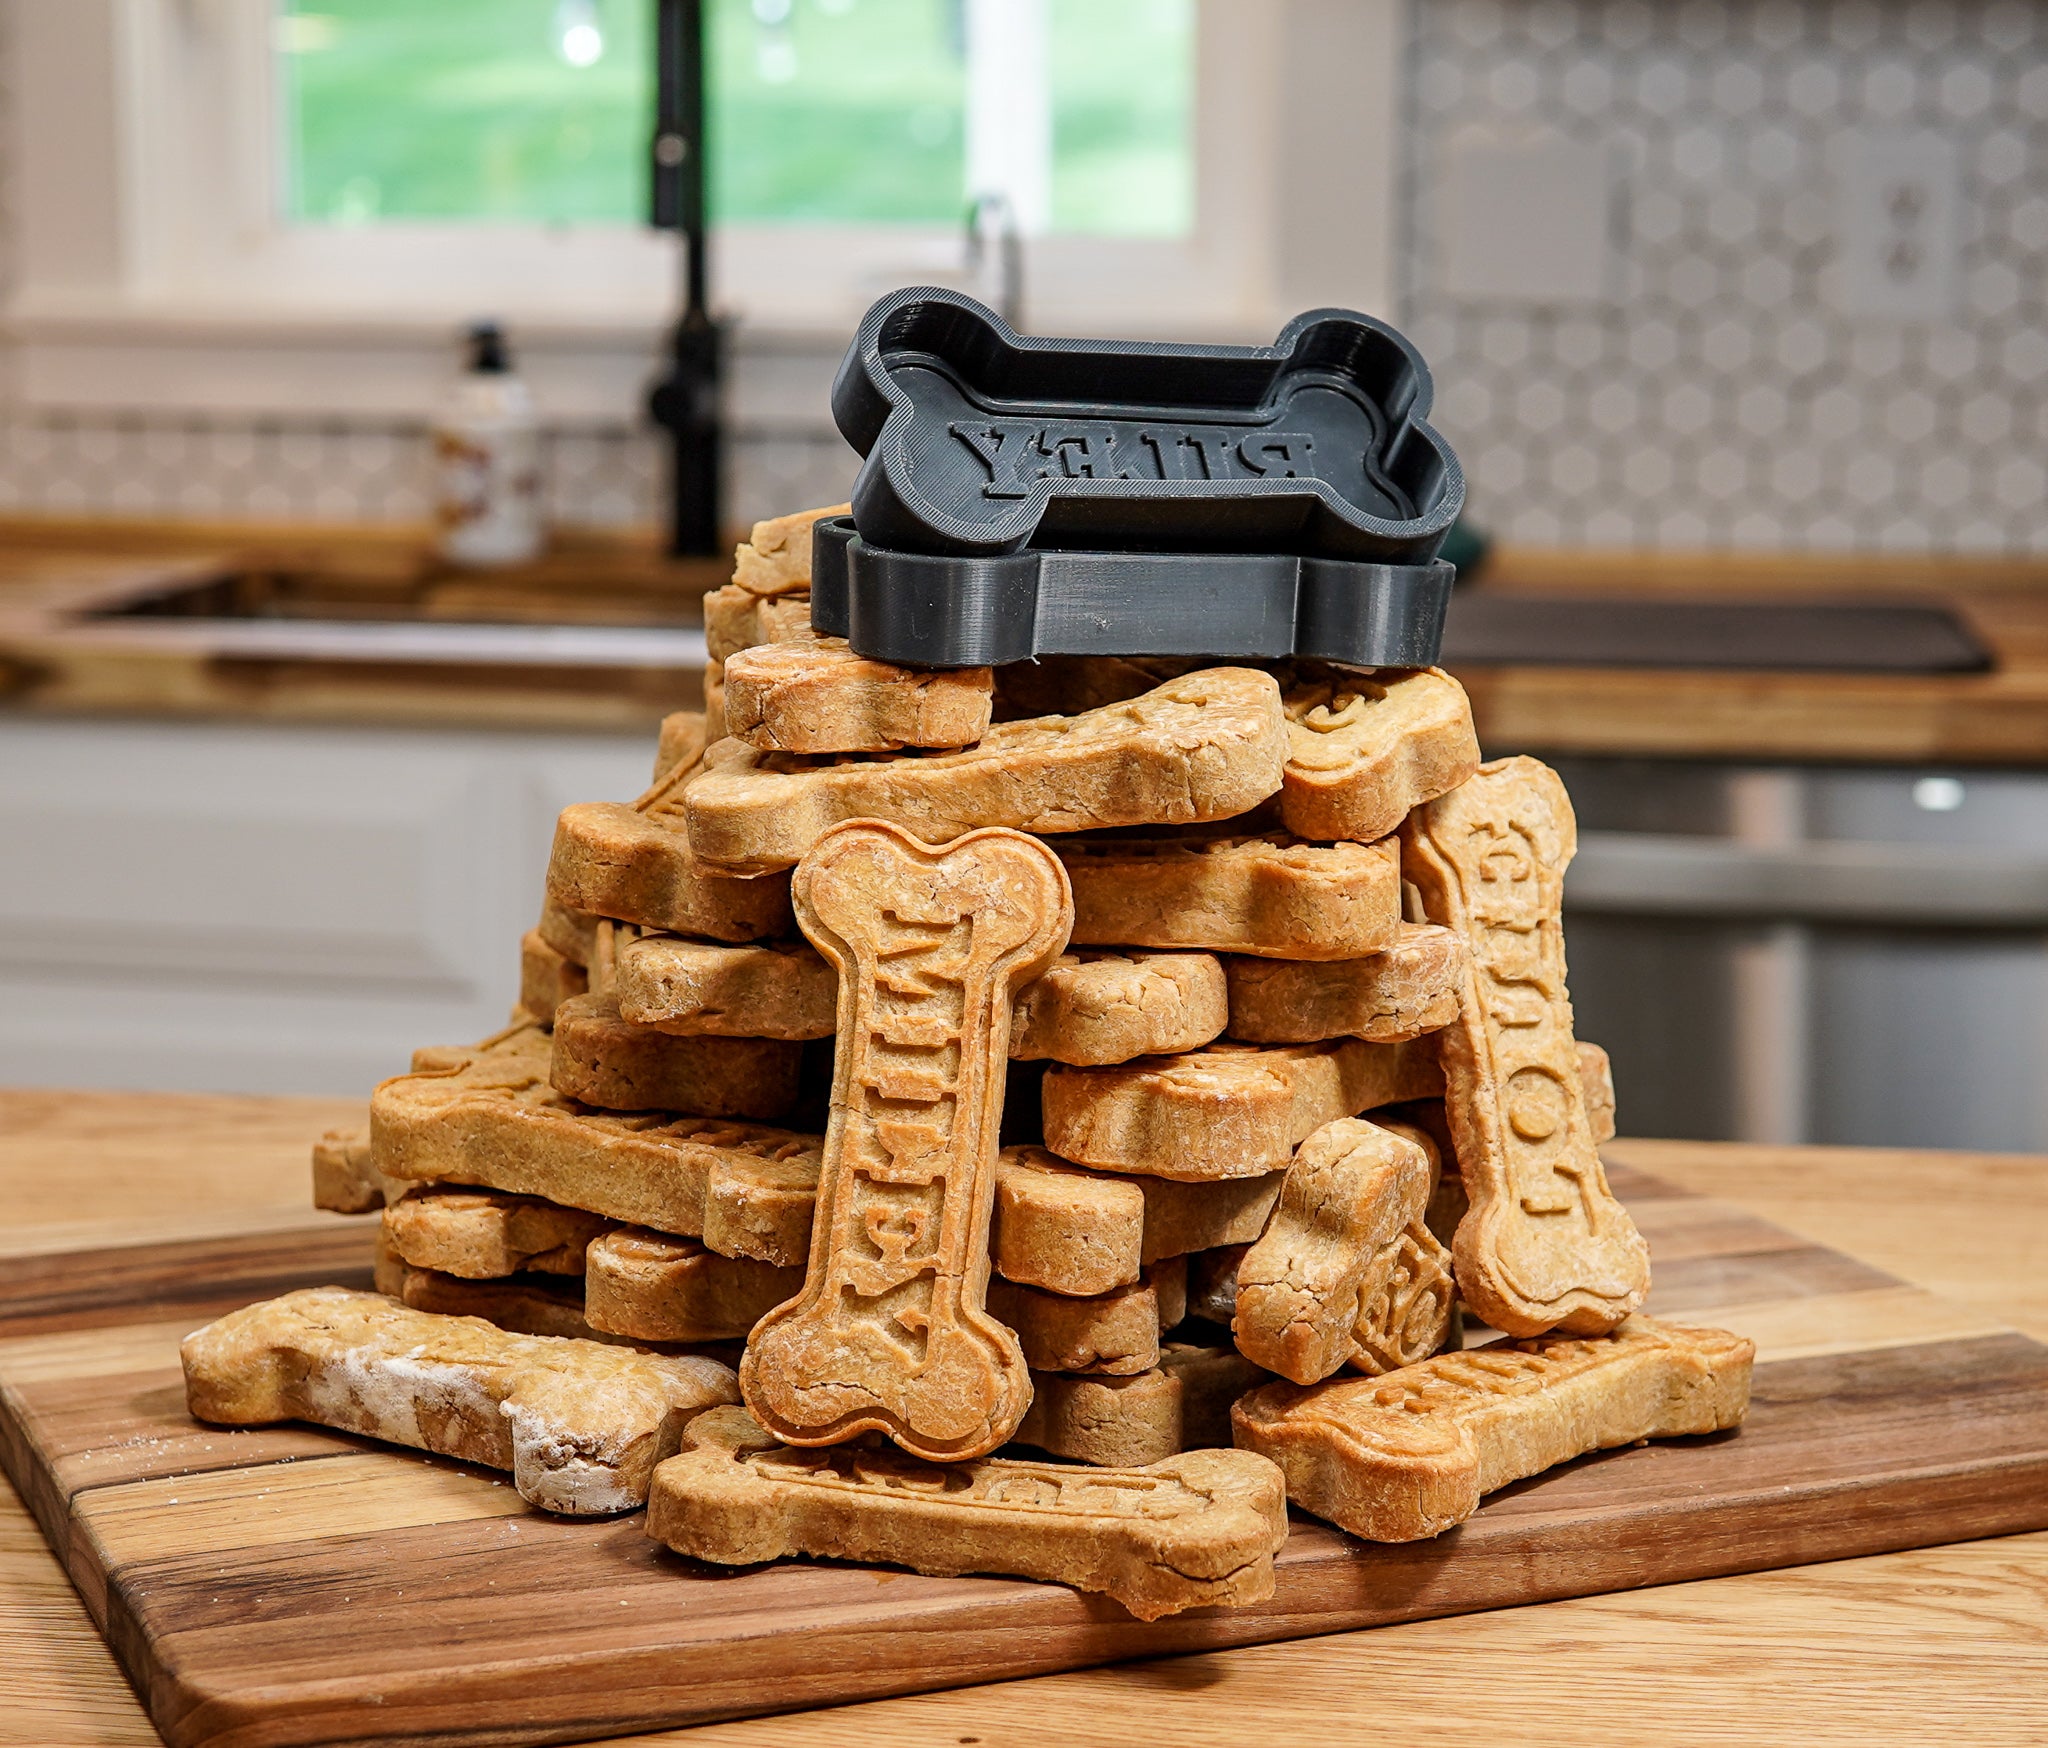 No More Cutting! Make 500 Non-Crumbly Dog Treats From a Pyramid Mold -  eileenanddogs